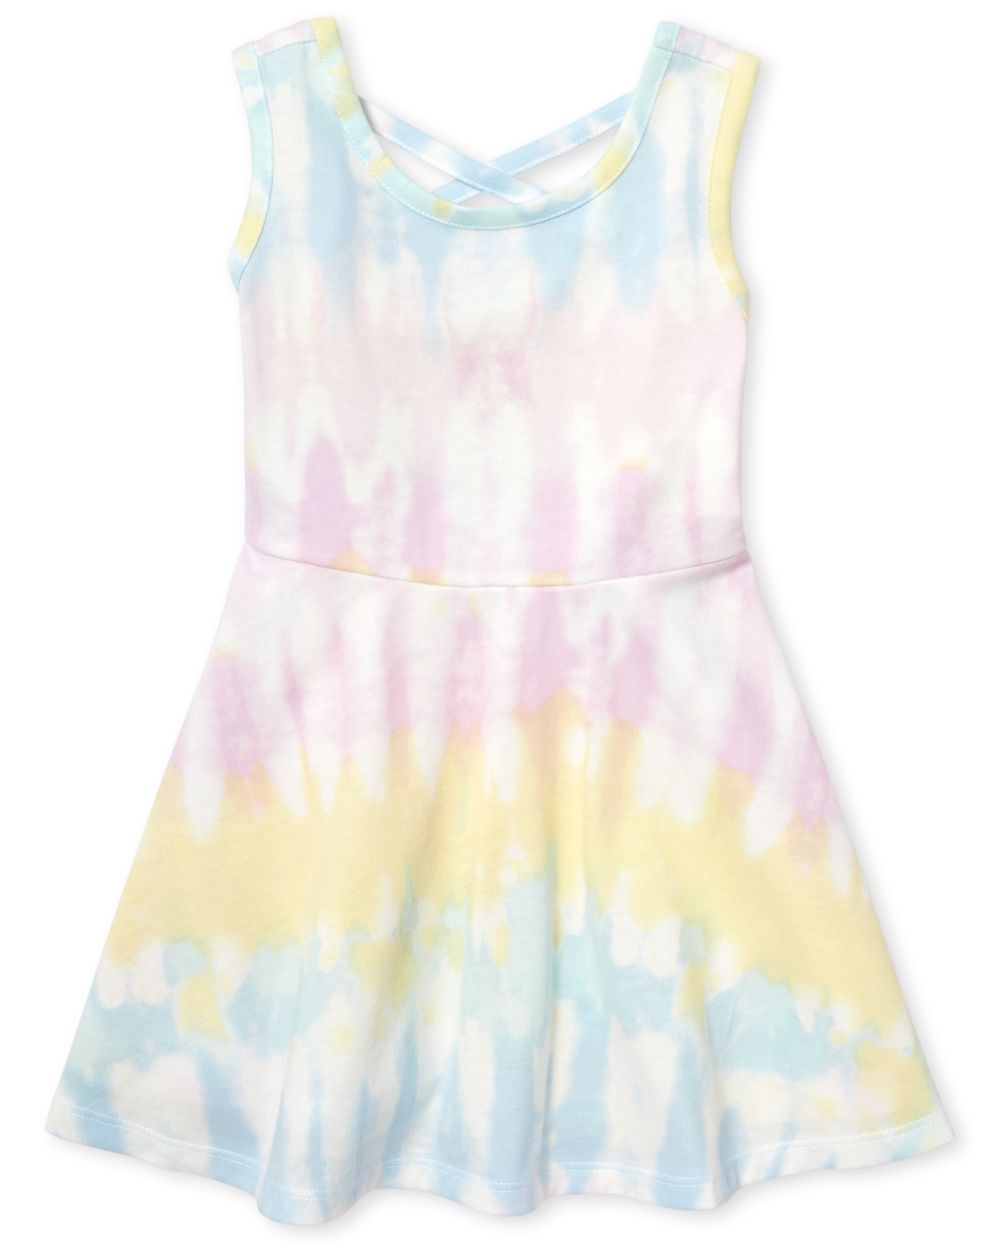 Baby And Toddler Girls Sleeveless Tie Dye Knit Cut Out Dress